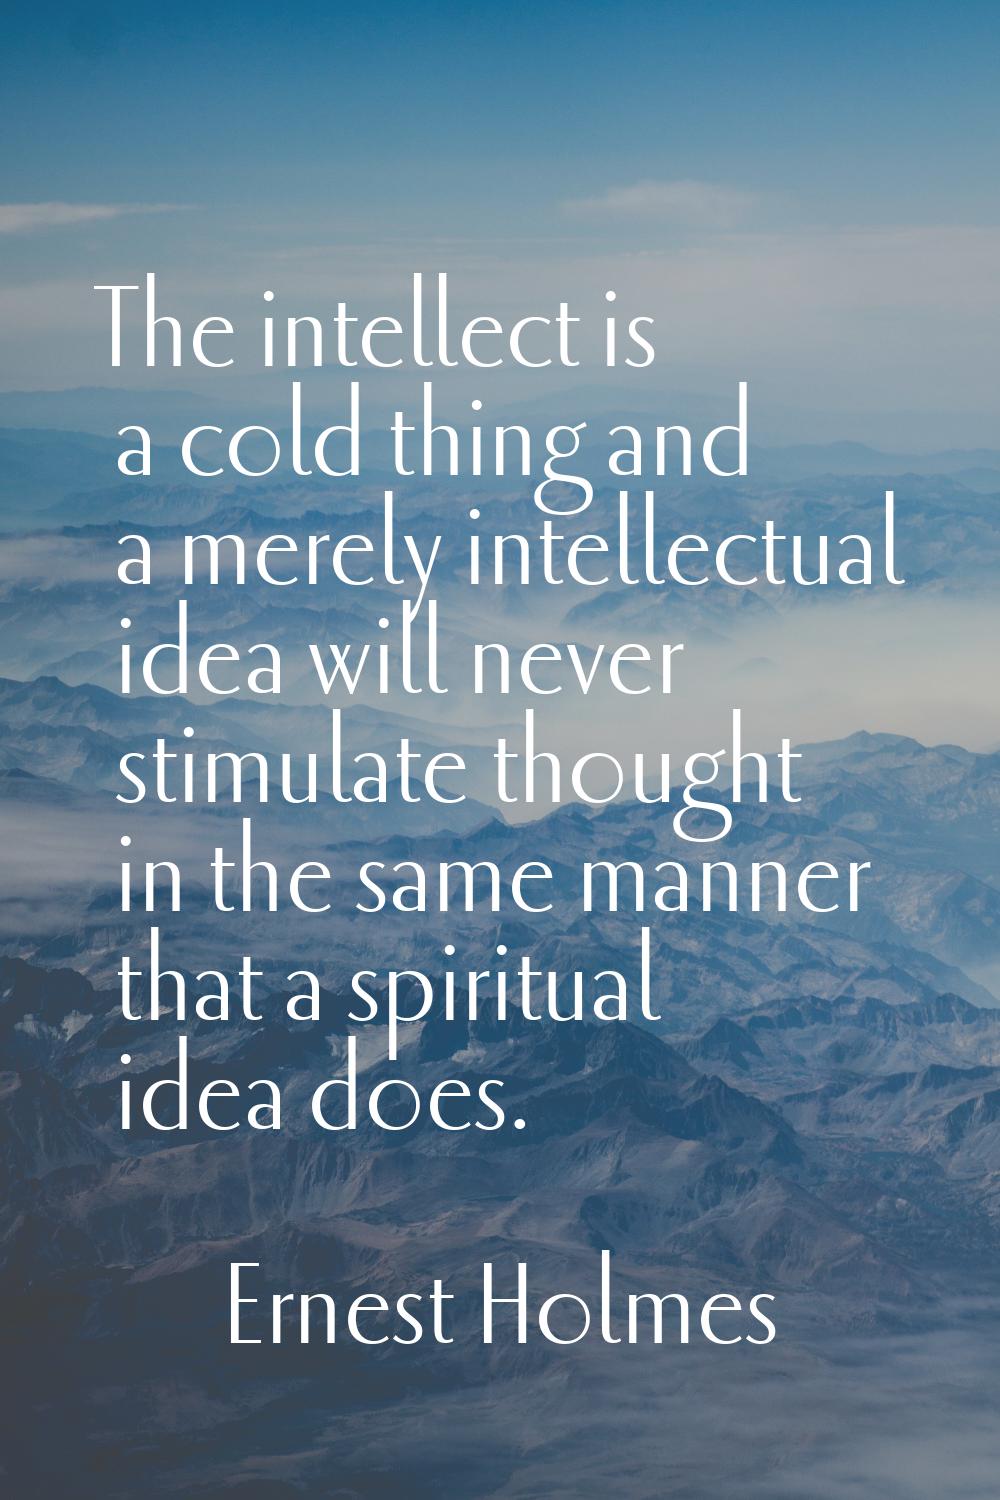 The intellect is a cold thing and a merely intellectual idea will never stimulate thought in the sa